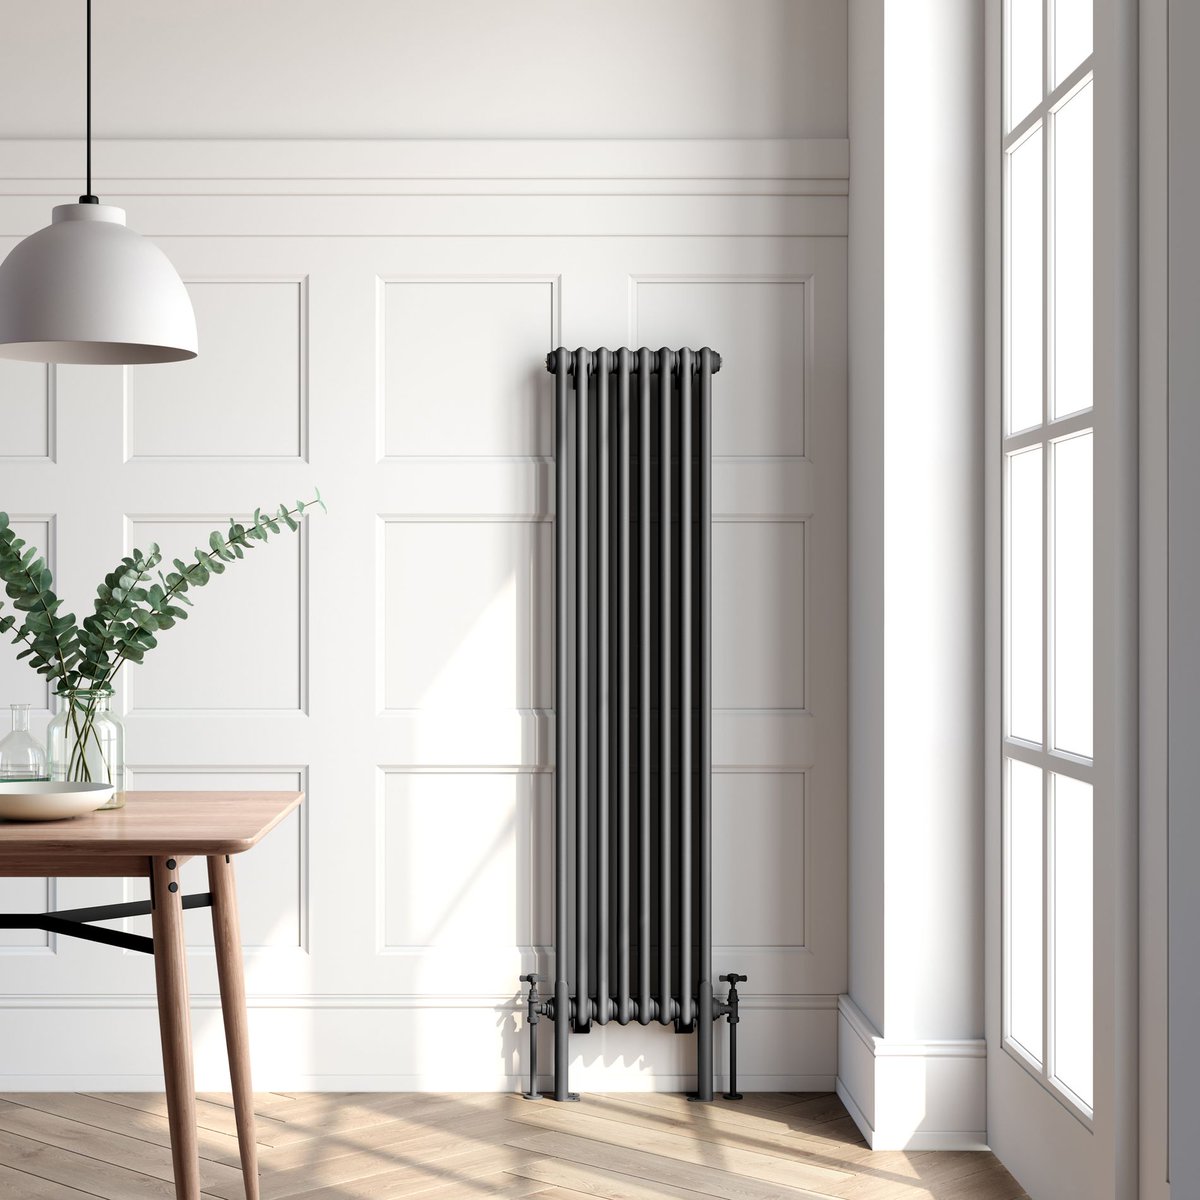 25% off radiators and towel rails ends at midnight! 

Swipe for a little look at our range 👀

Shop heating: bathroommountain.co.uk/heating

#sale #radiators #heating #towelrail #bathroominspo #discount #homeinspo